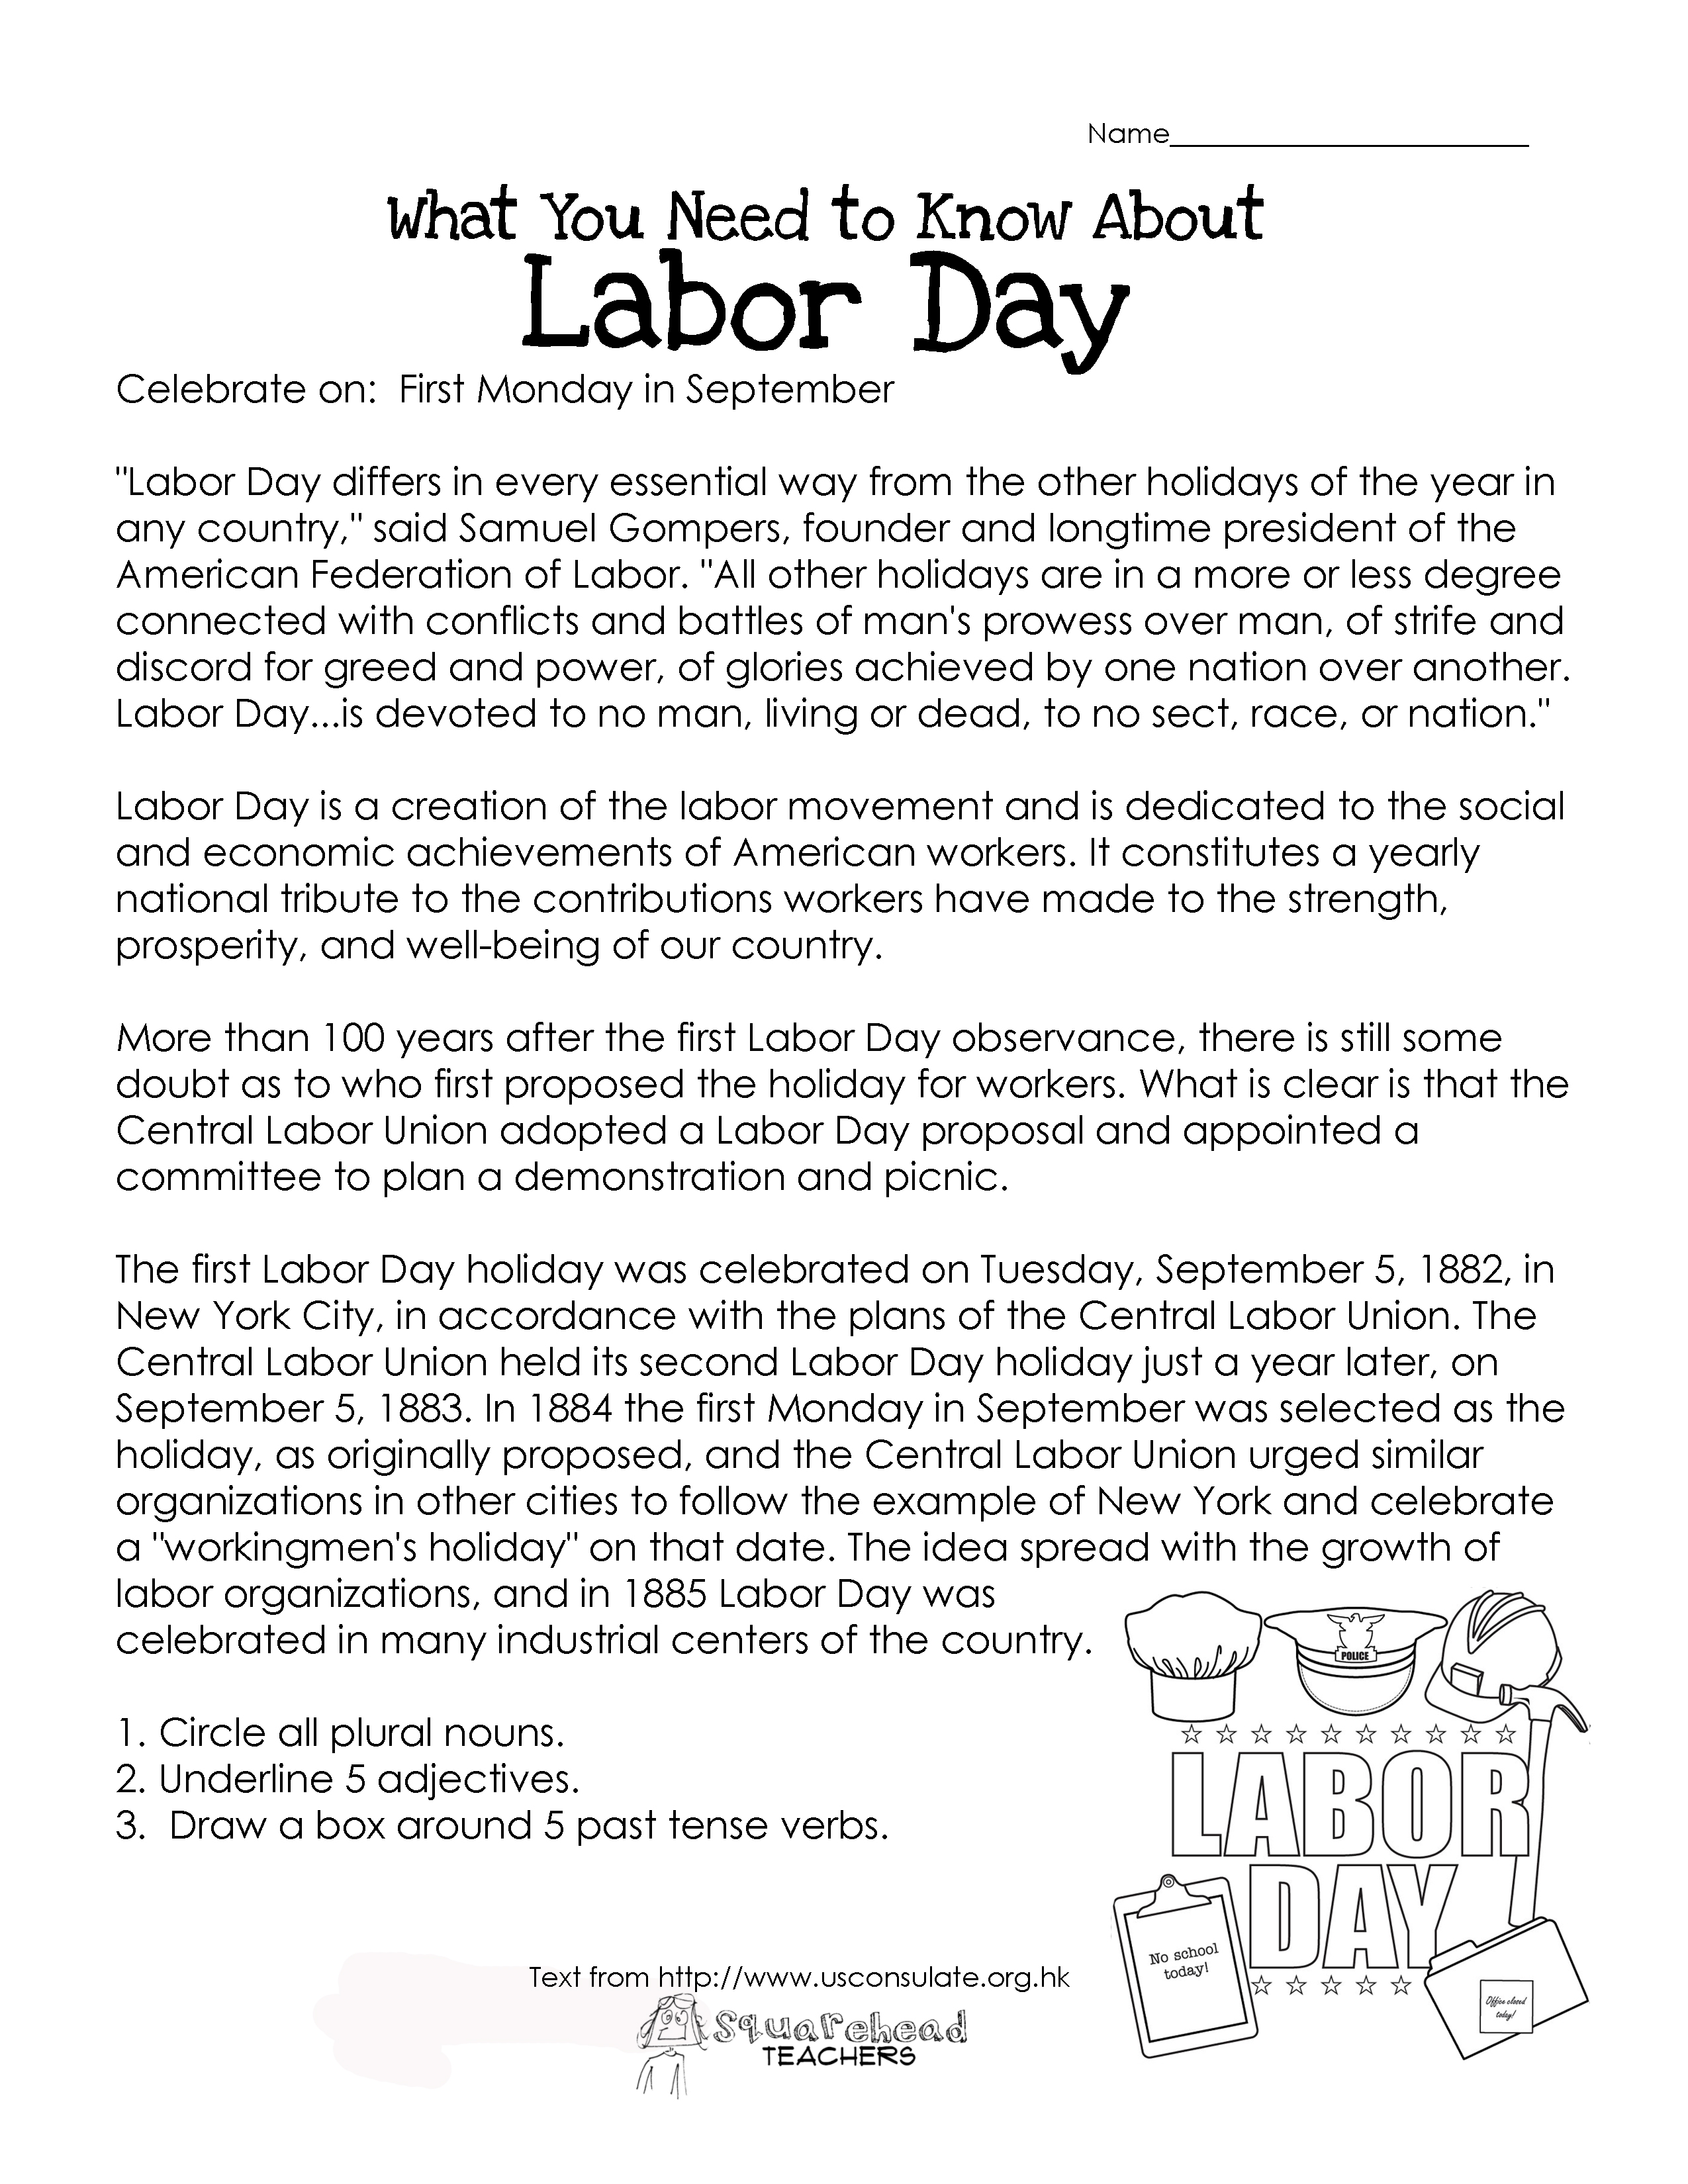 labor-day-what-you-need-to-know-free-worksheet-squarehead-teachers